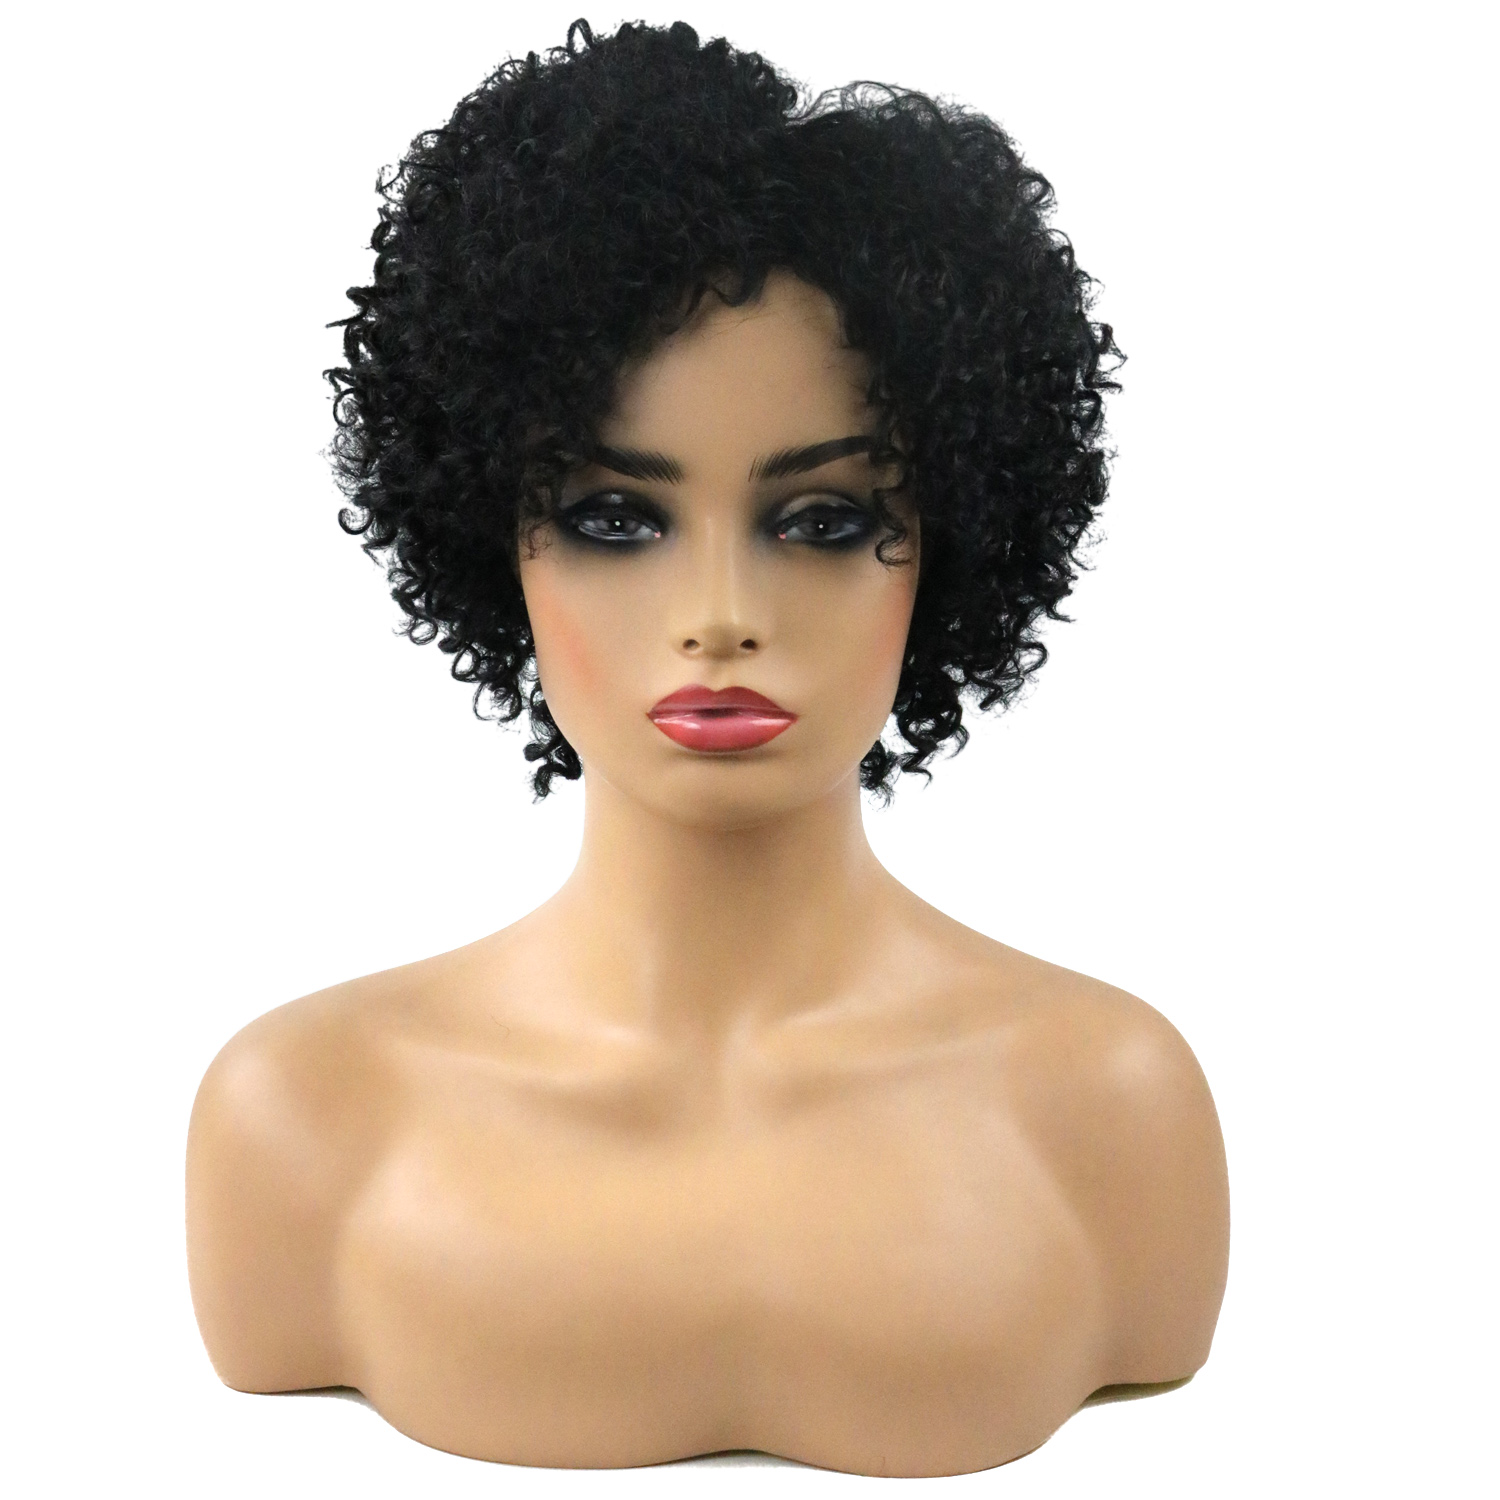 Ericdress Medium Kinky Curly Synthetic Hair African American Wig